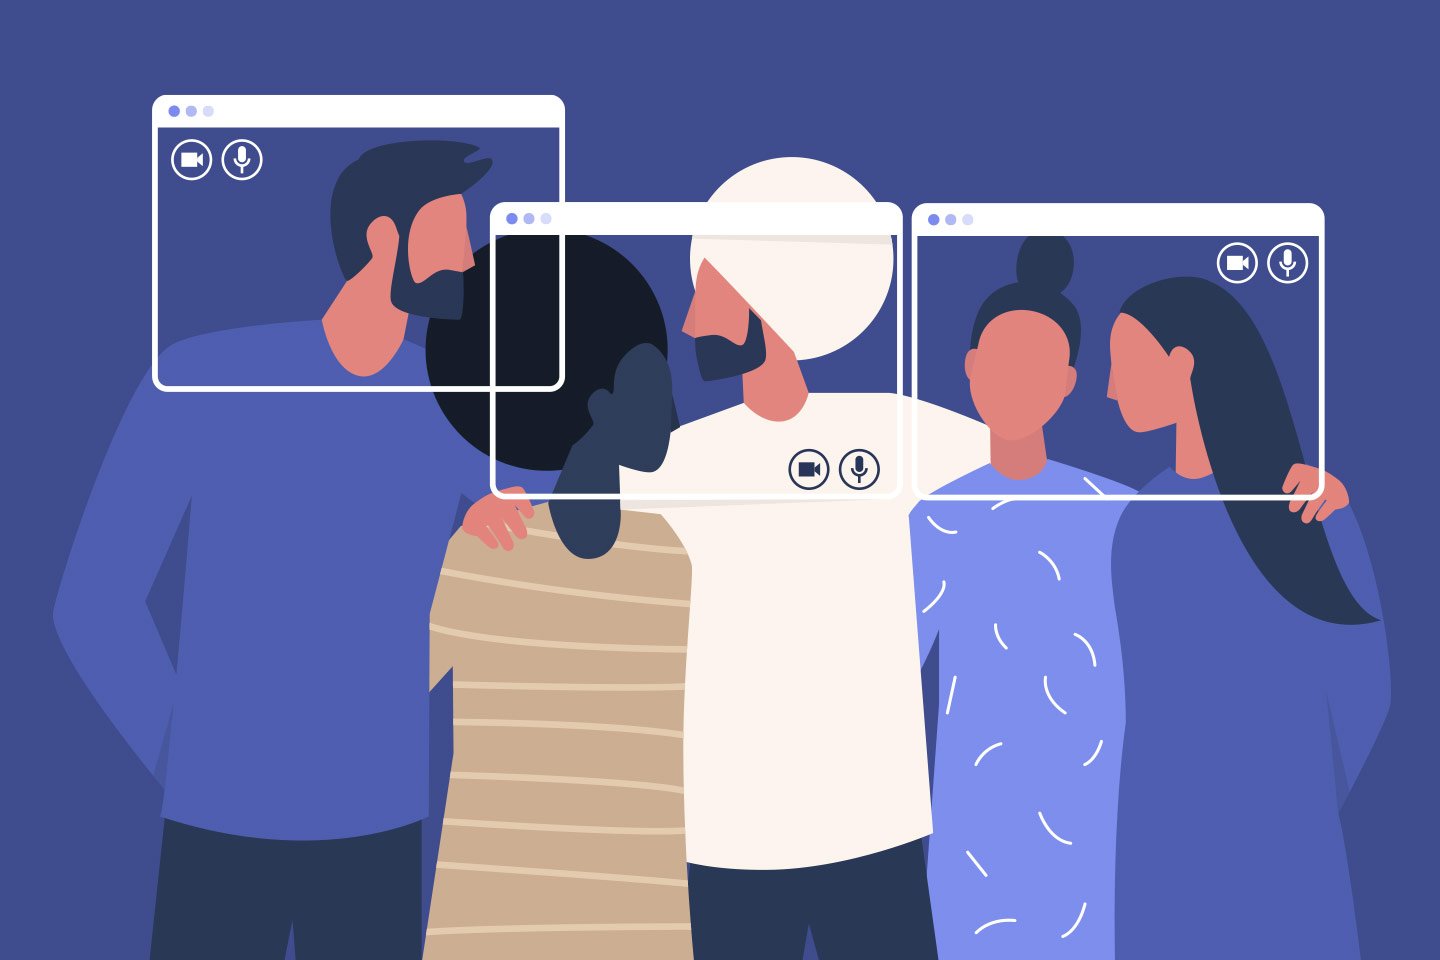 Illustration of people joining together virtually and in person.